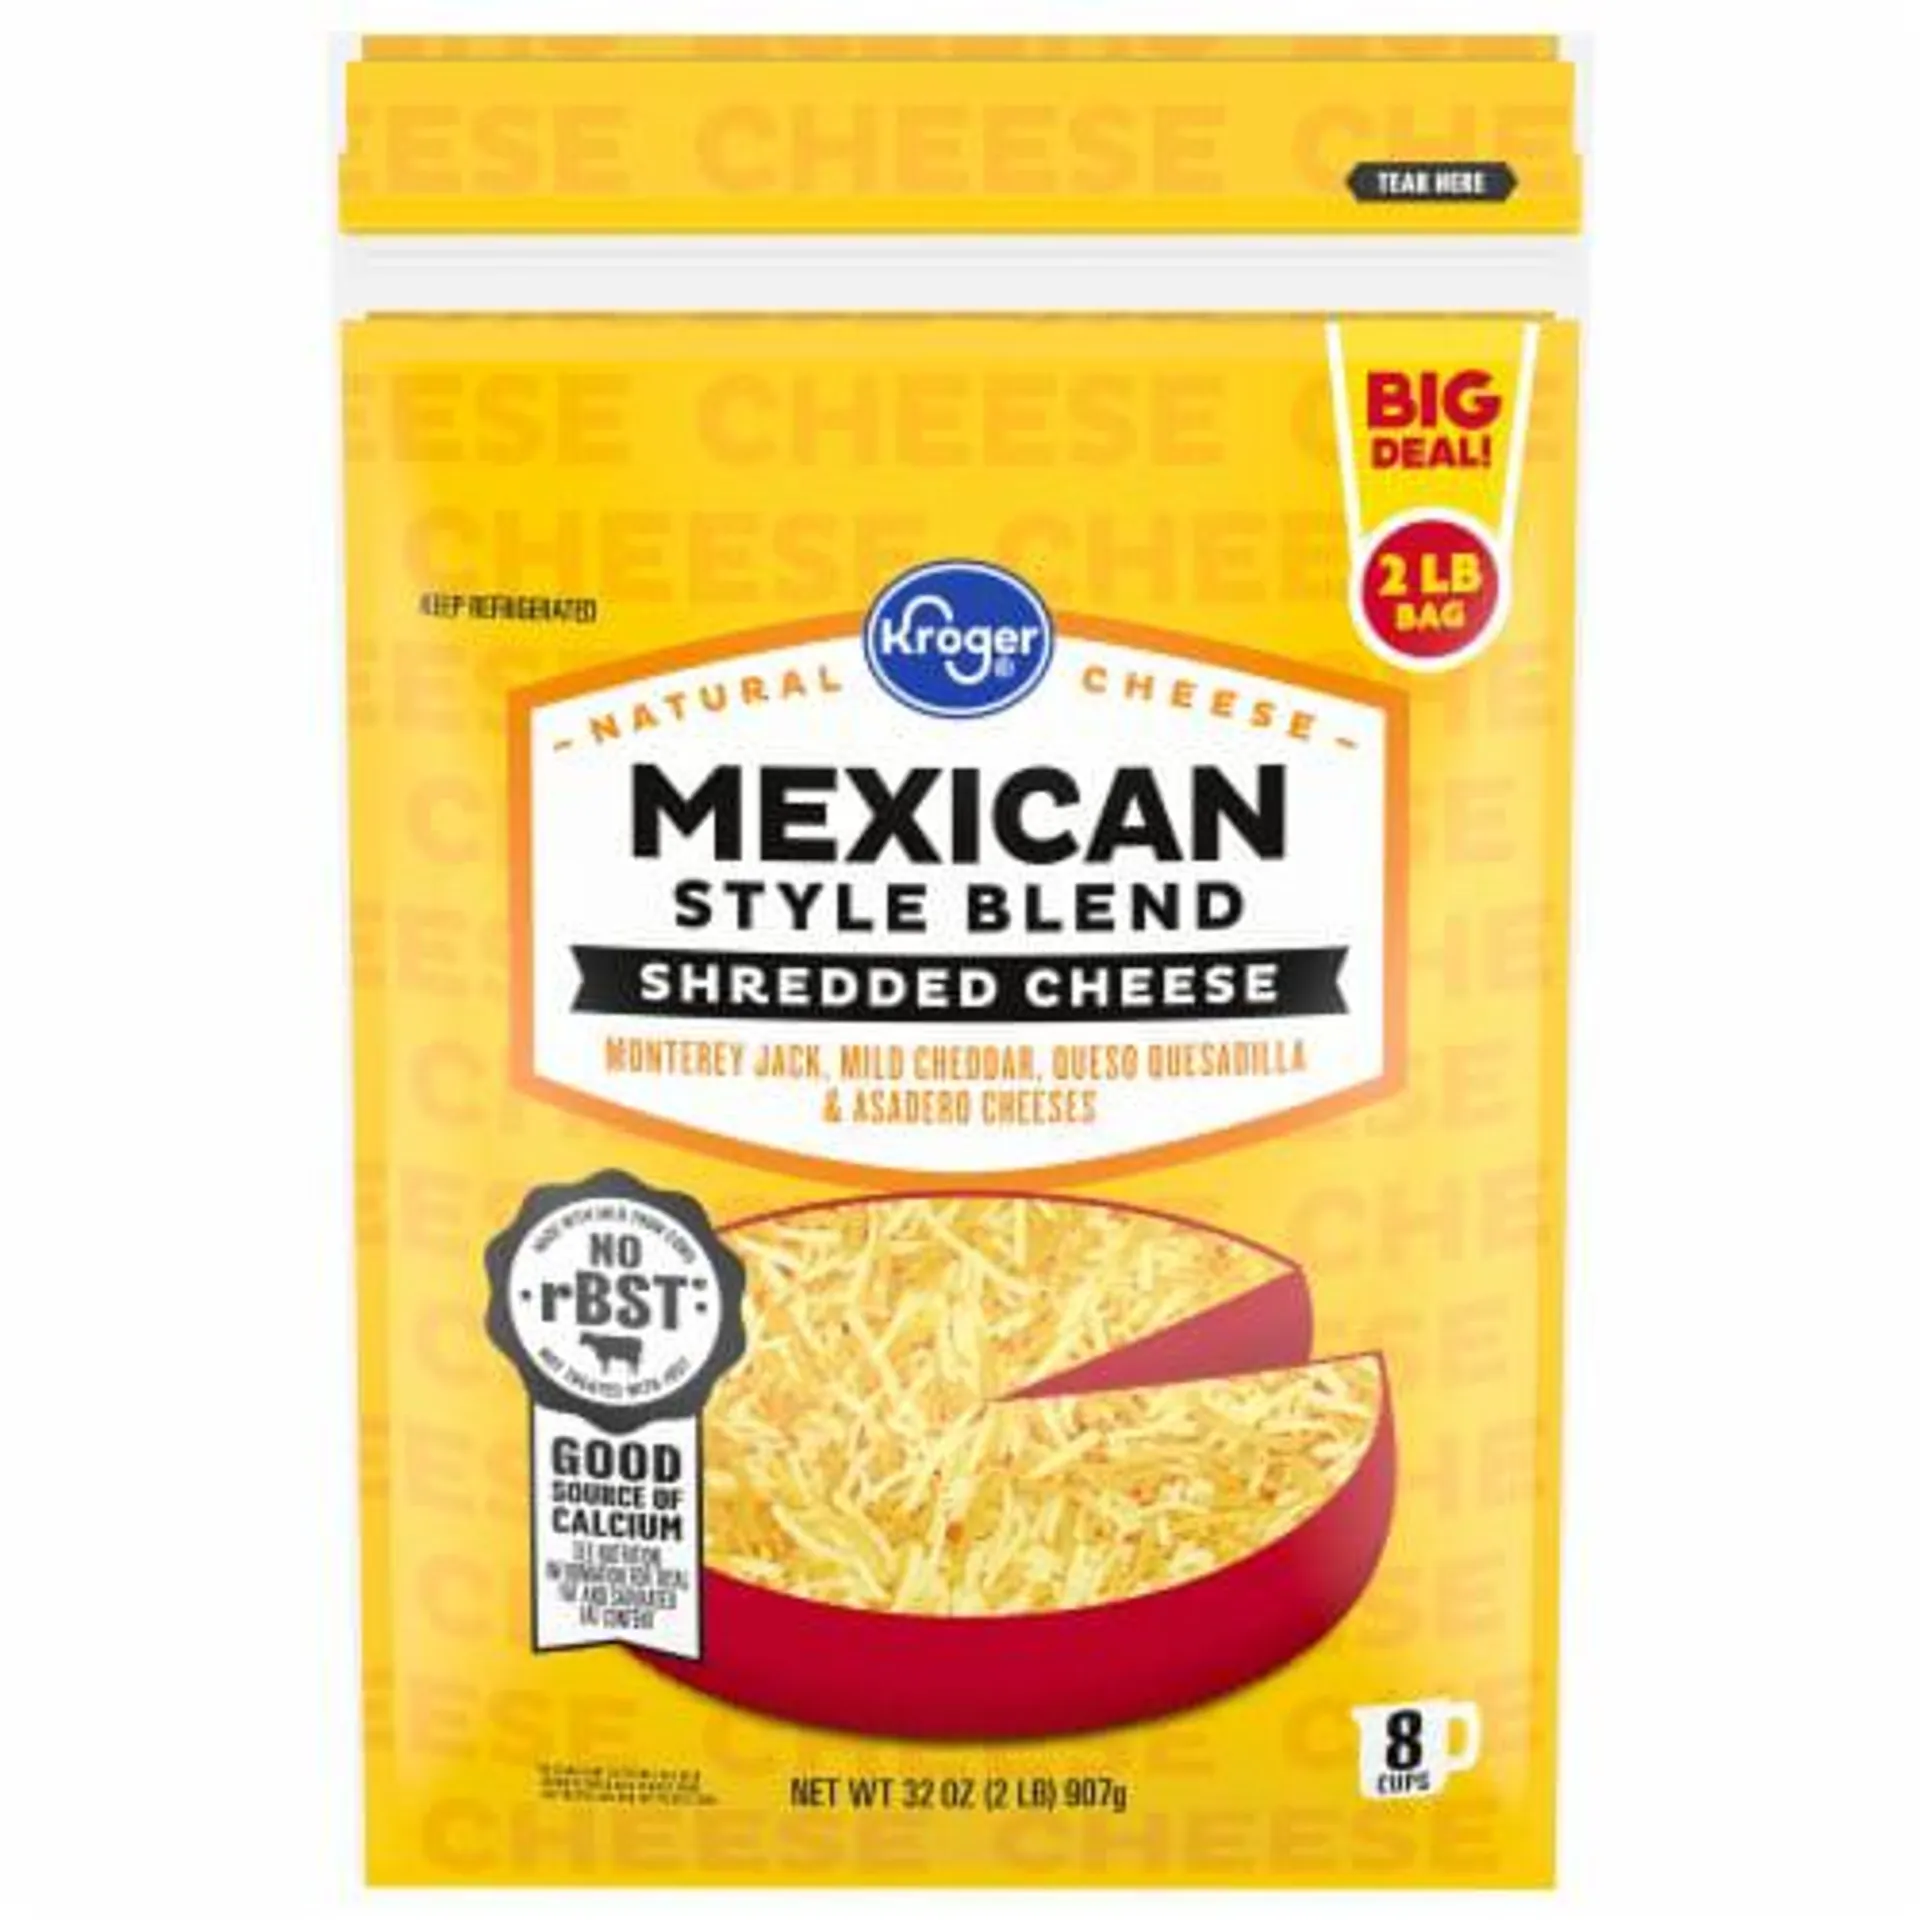 Kroger® Shredded Mexican Style Cheese Blend BIG Deal!